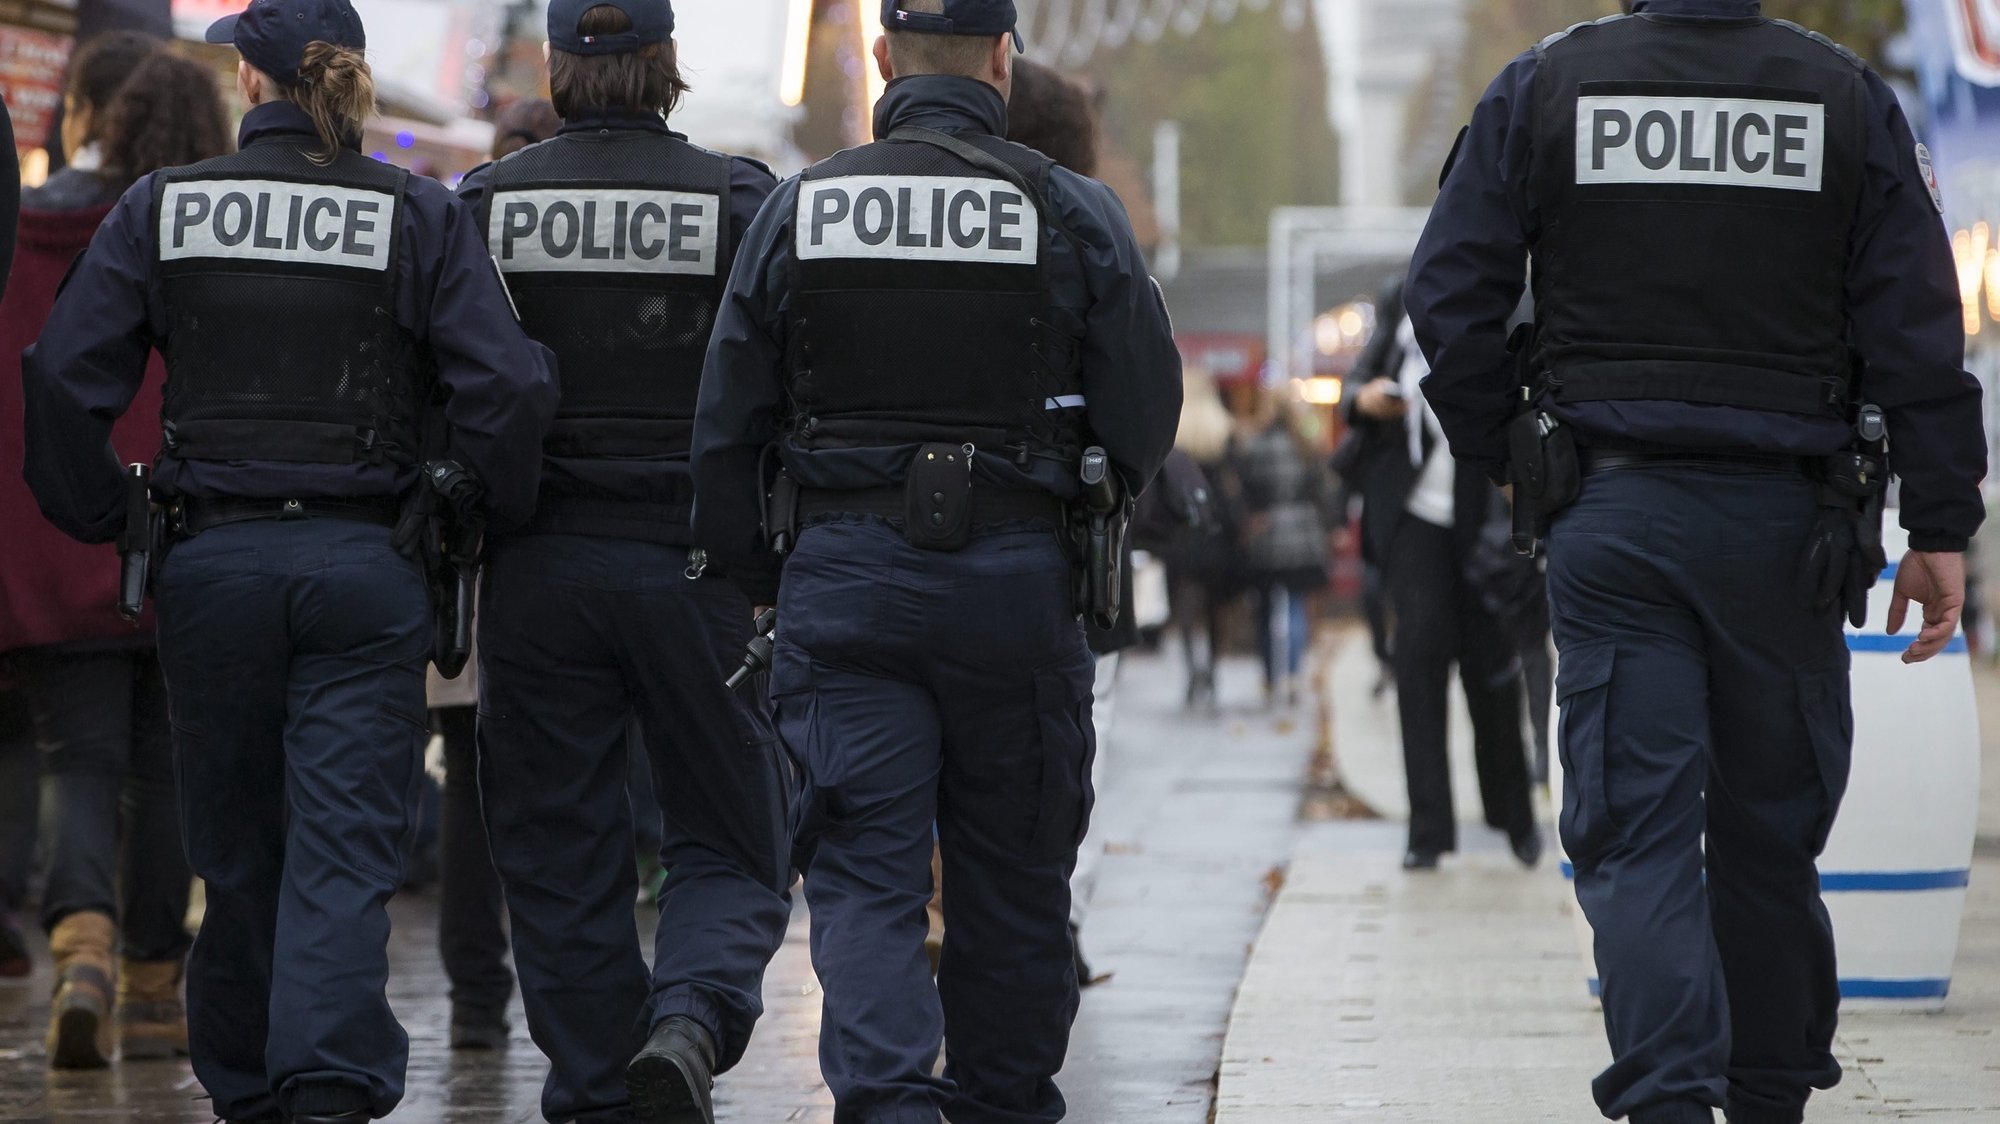 epa05033098 French police officers patrol the outdoor Christmas market on the renowned Avenue des Champs-Elysees in Paris, as part of the state-of-emergency and heightened security measures in Paris following the 13 November attacks, in Paris, France, 19 November 2015. Paris suffered terrorist attacks at the hands of the so-called Islamic State on November 13, when Islamist suicide bombers and gunmen claimed the lives of 129 people, and injured 352.  EPA/IAN LANGSDON